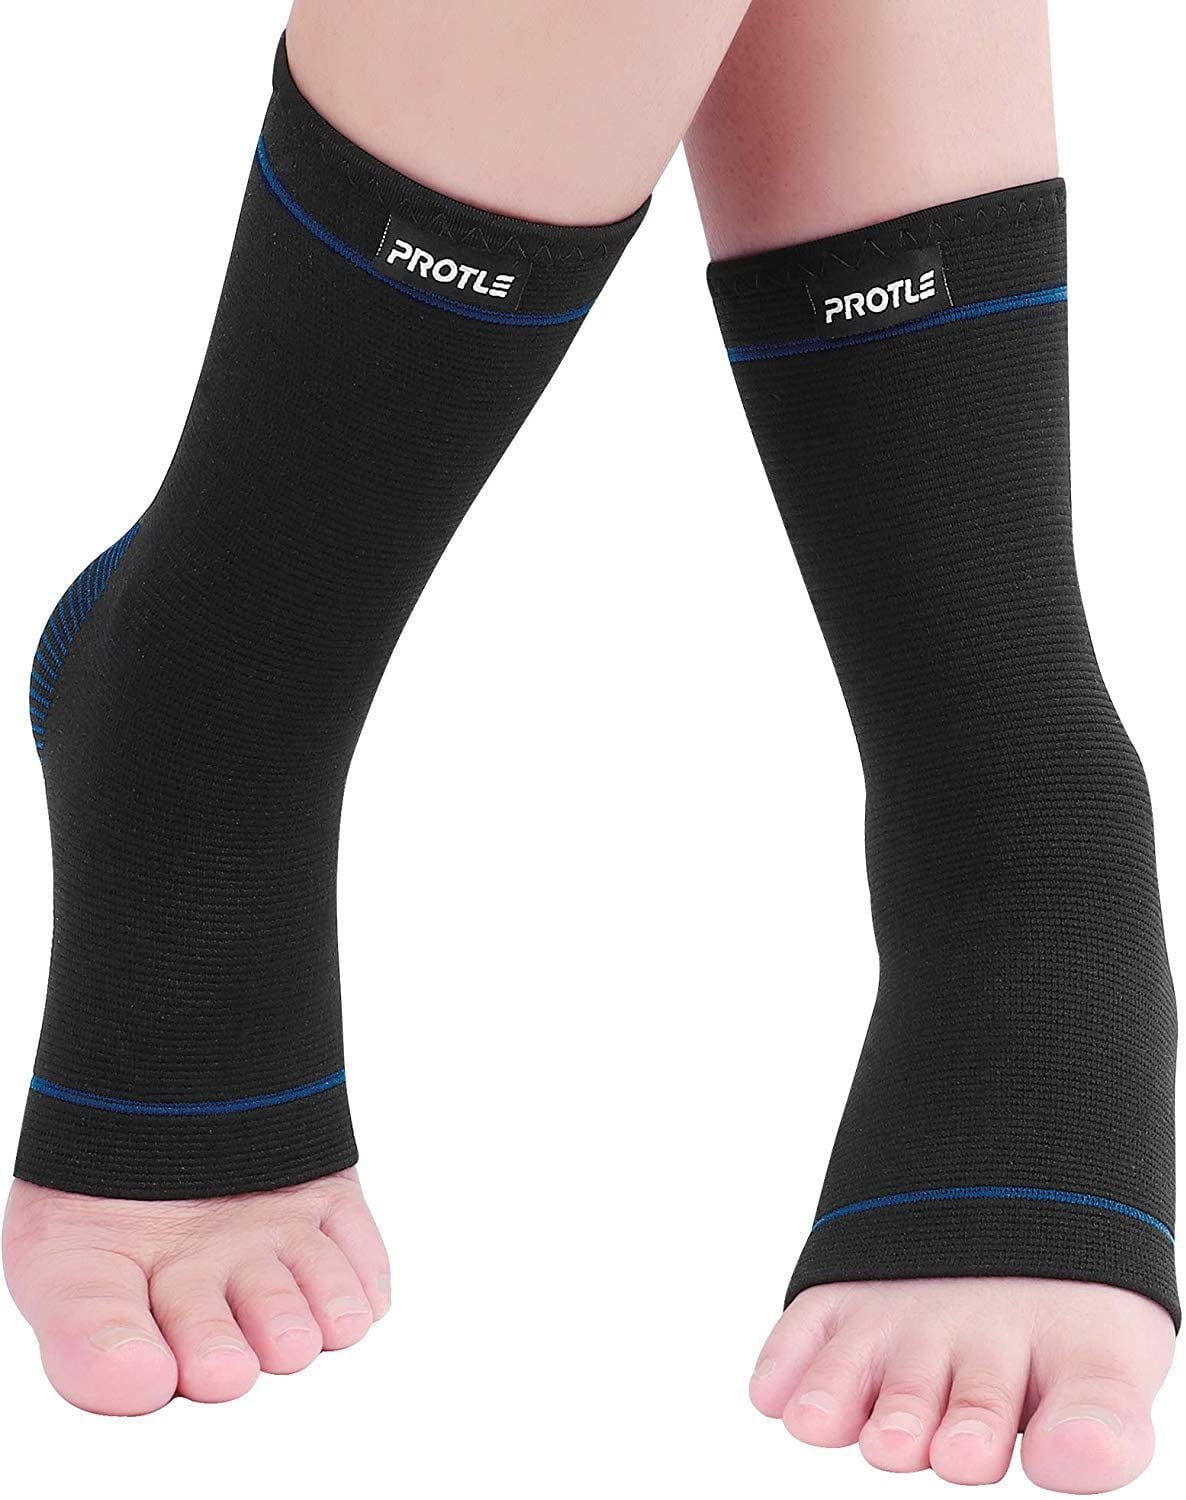 Relieve Arch Pain Reduce Foot Swelling 20-30 mmHg Foot Compression Sleeves for Ankle/Heel Support HipStone Plantar Fasciitis Compression Socks 1 Pair Increase Blood Circulation